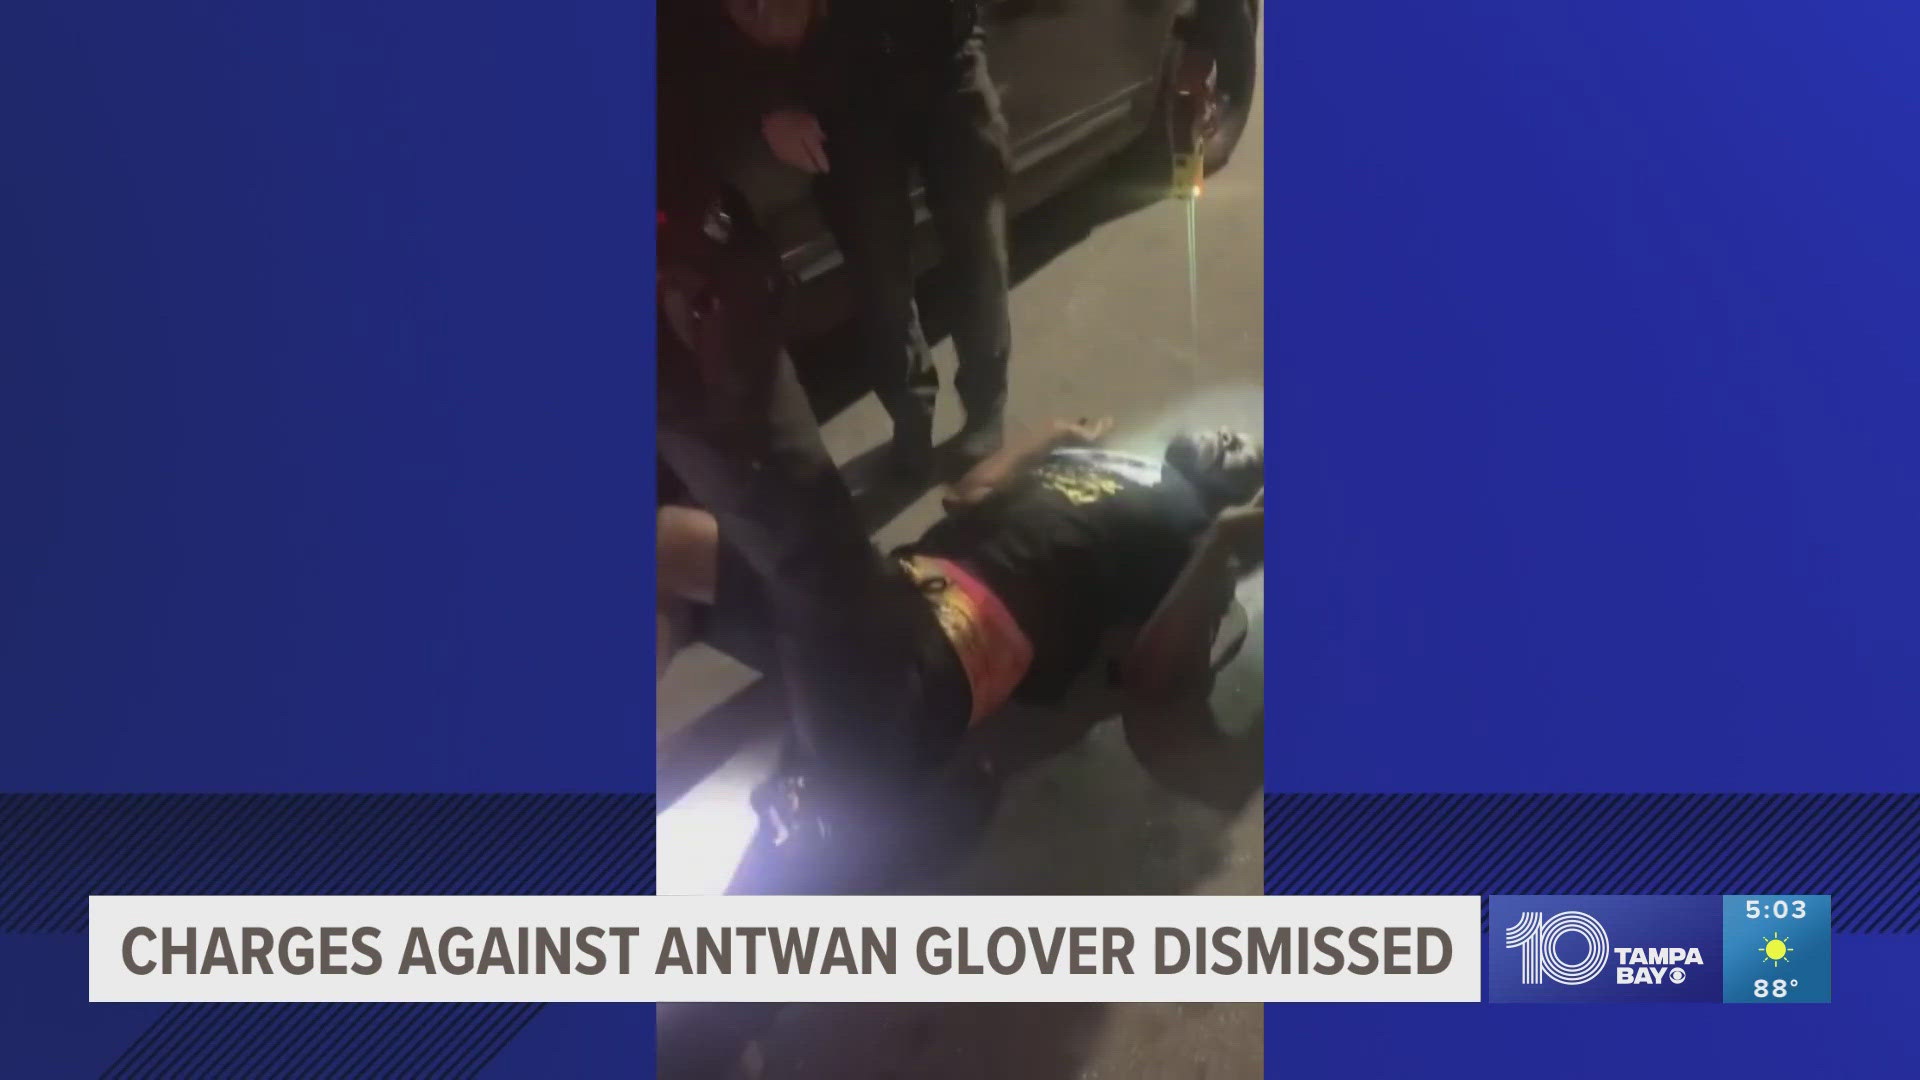 Antwan Glover was beaten and tased in front of his family in December 2022. The violent arrest was captured on video by a bystander.